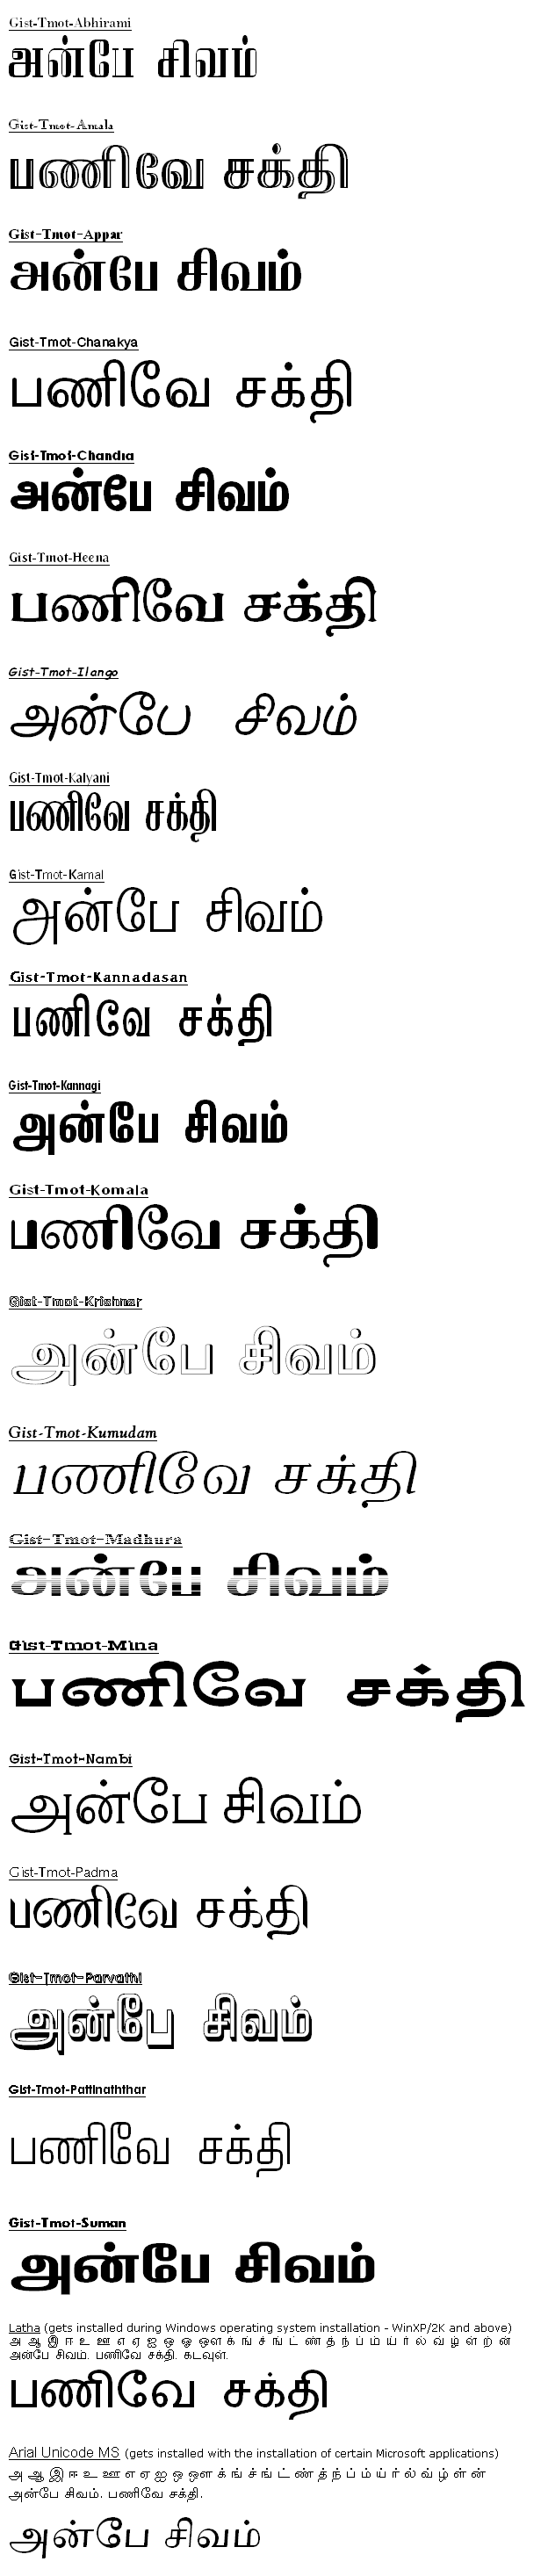 free download tamil fonts for microsoft word 2010